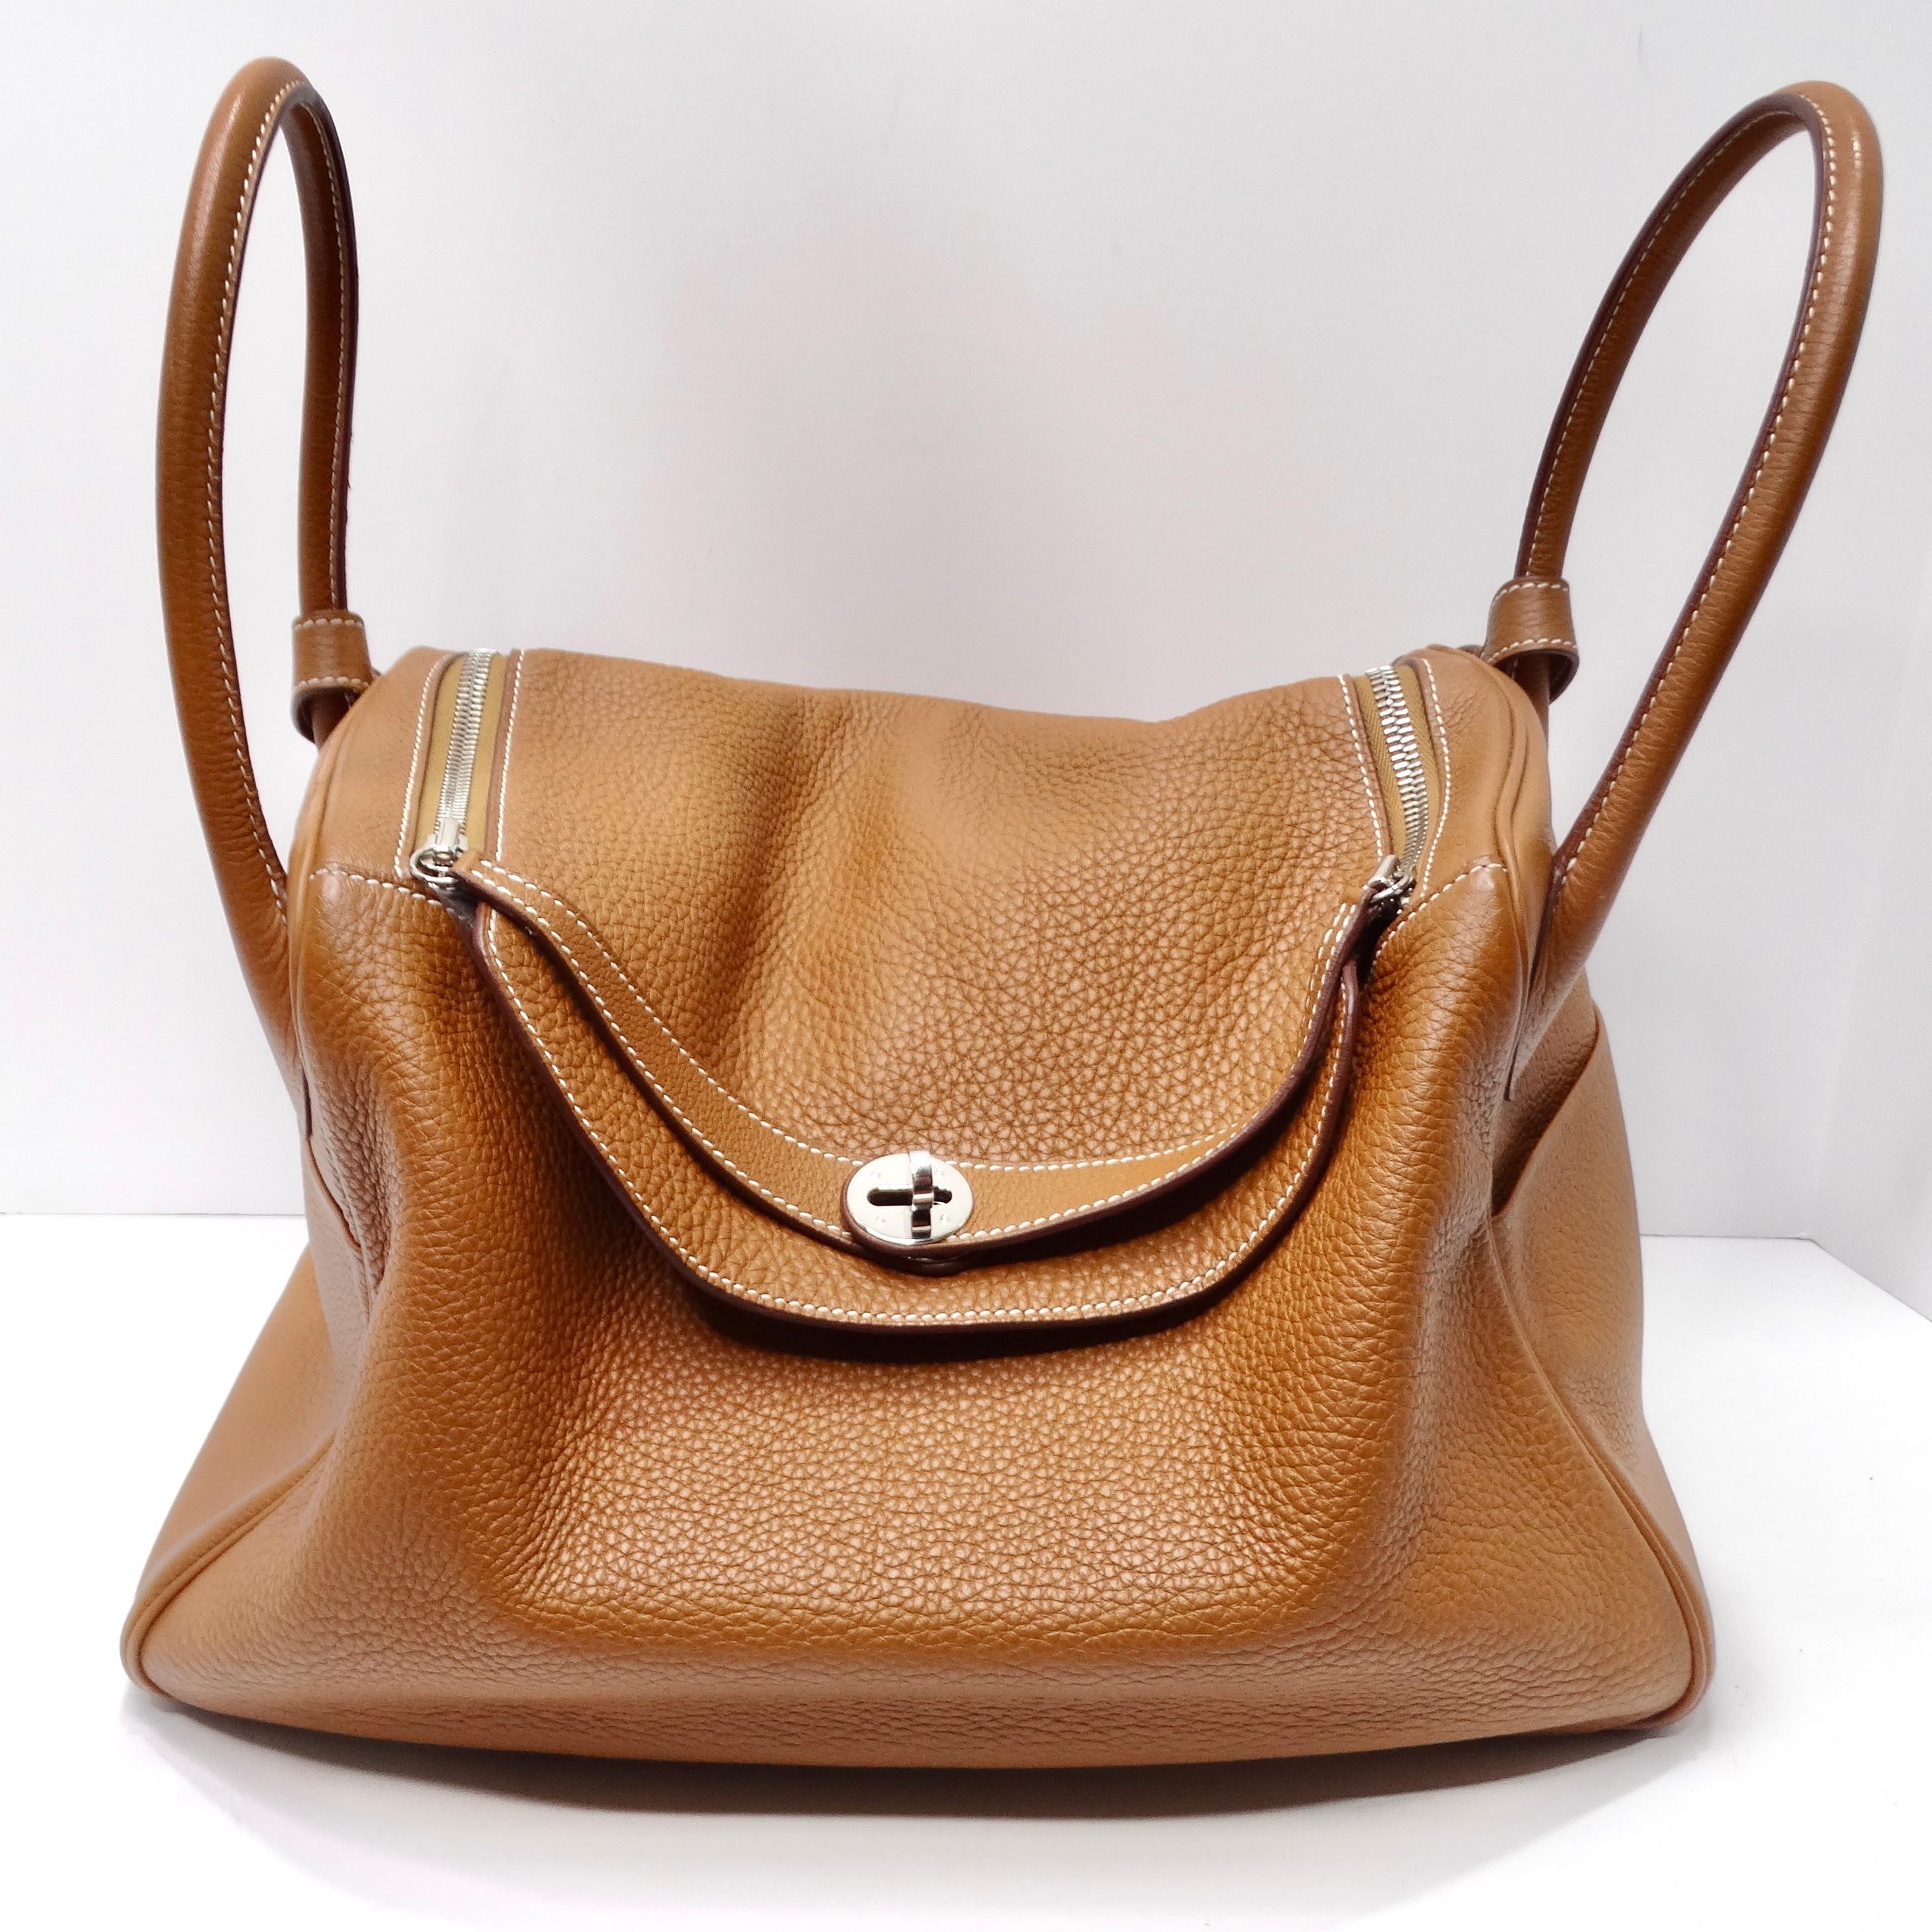 If you're in search of a handbag that seamlessly blends iconic design with unrivaled versatility, your quest ends here. The Hermès Lindy 34 Gold Clemence Leather Shoulder Bag is the embodiment of timeless elegance and adaptability.  The Lindy's